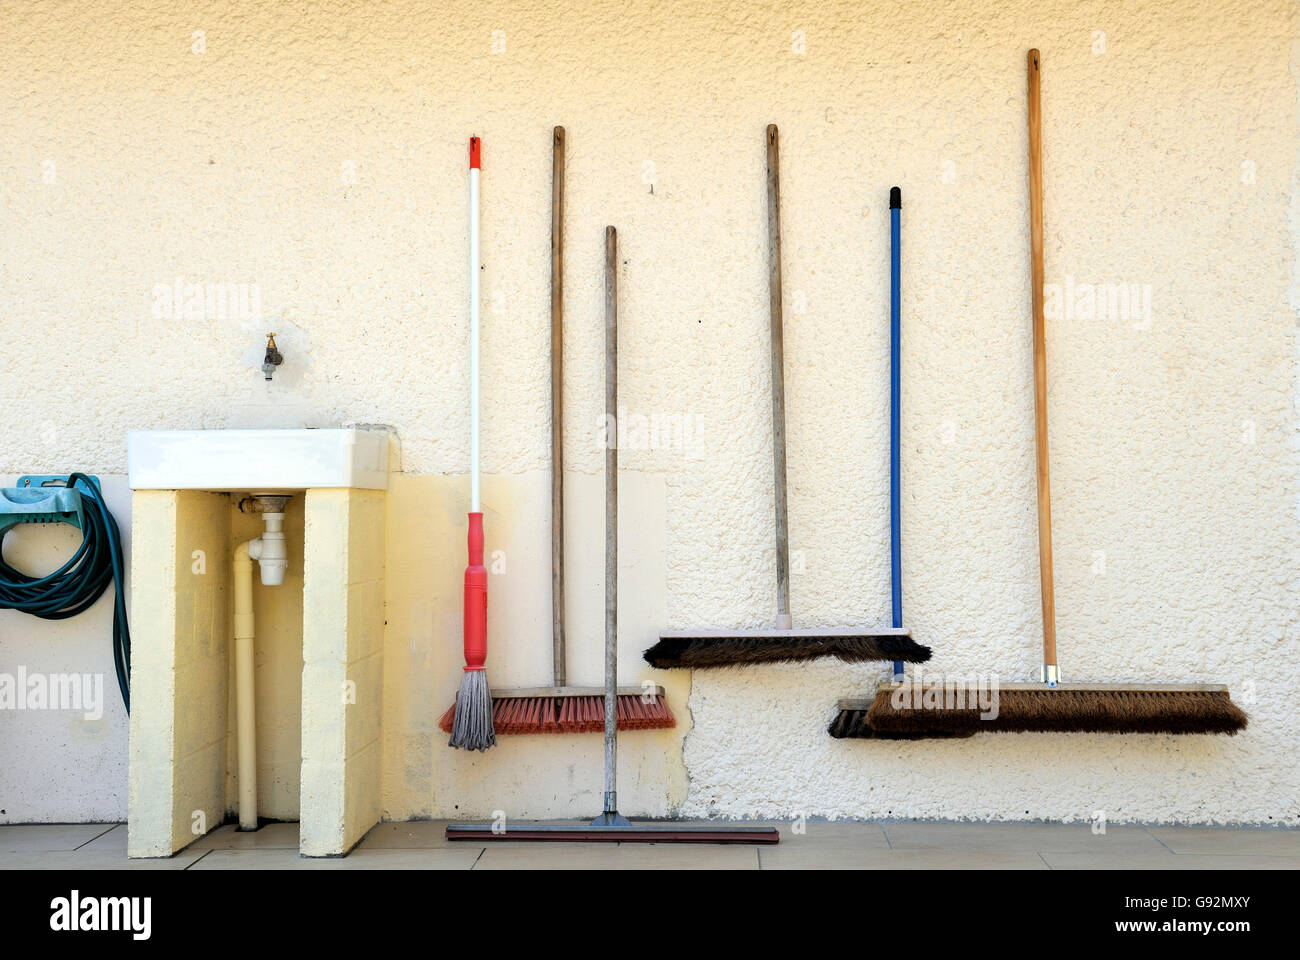 Brooms at a campsite situated next to a sink Stock Photo